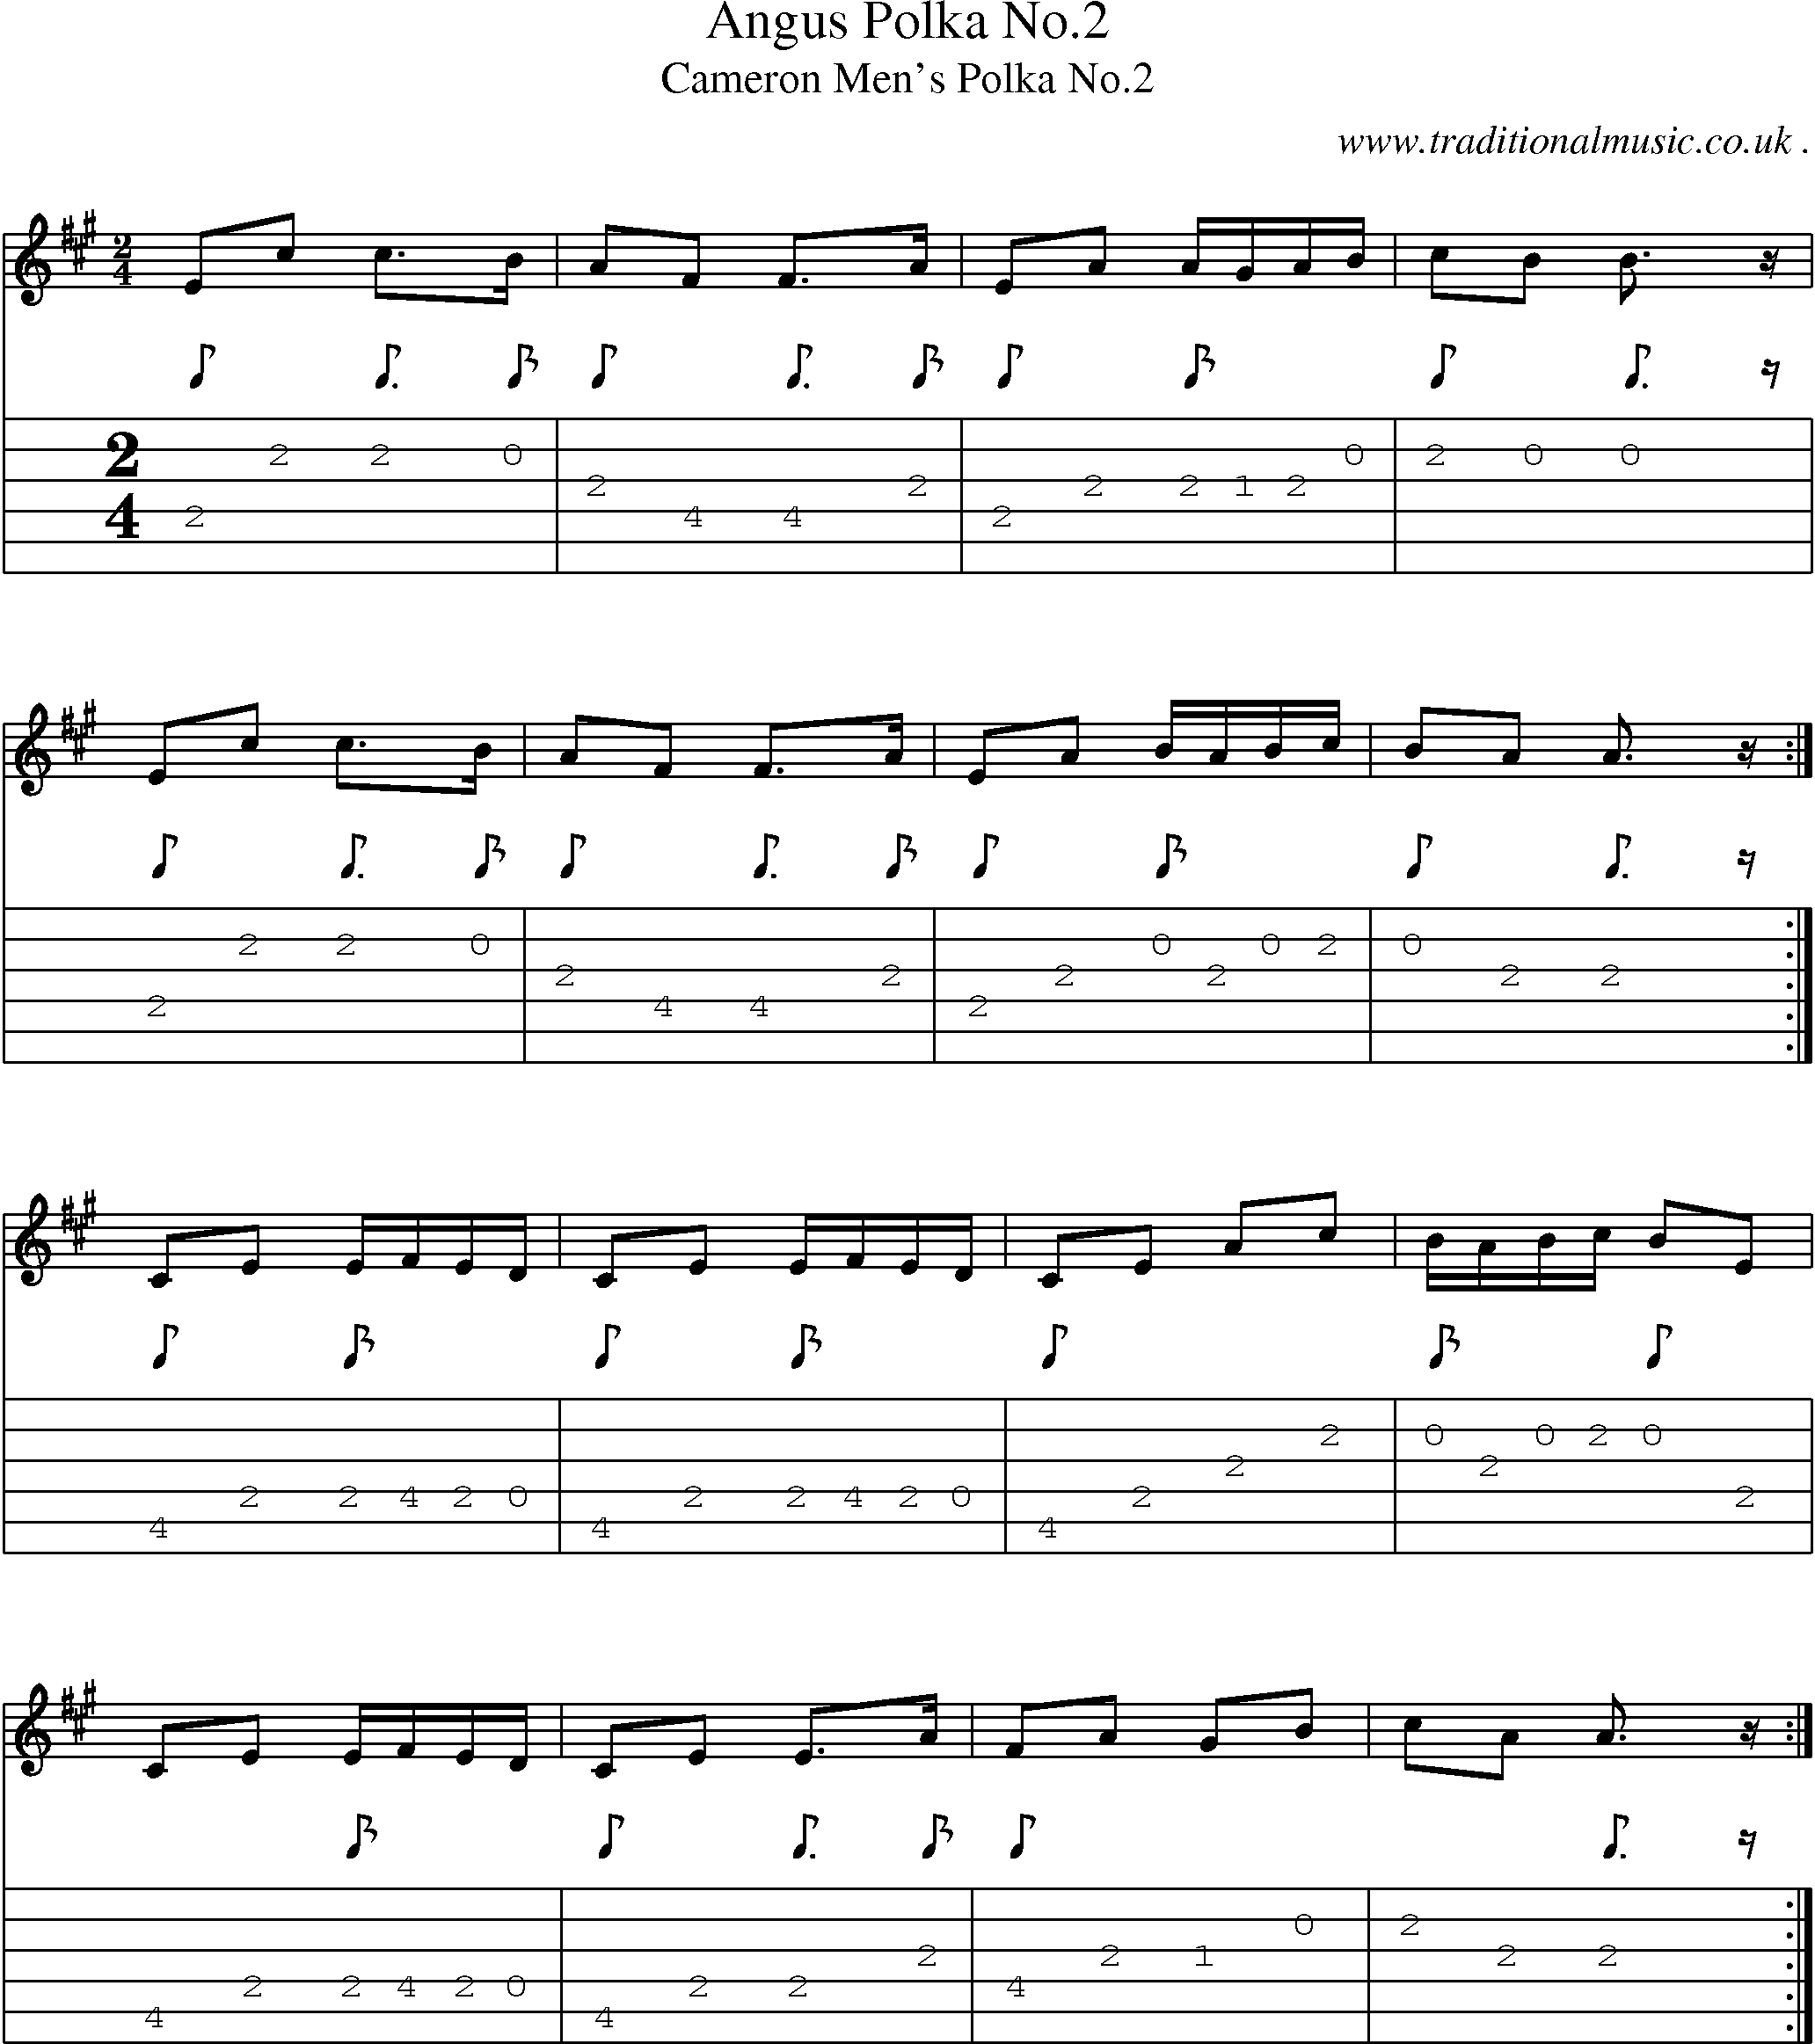 Sheet-music  score, Chords and Guitar Tabs for Angus Polka No2